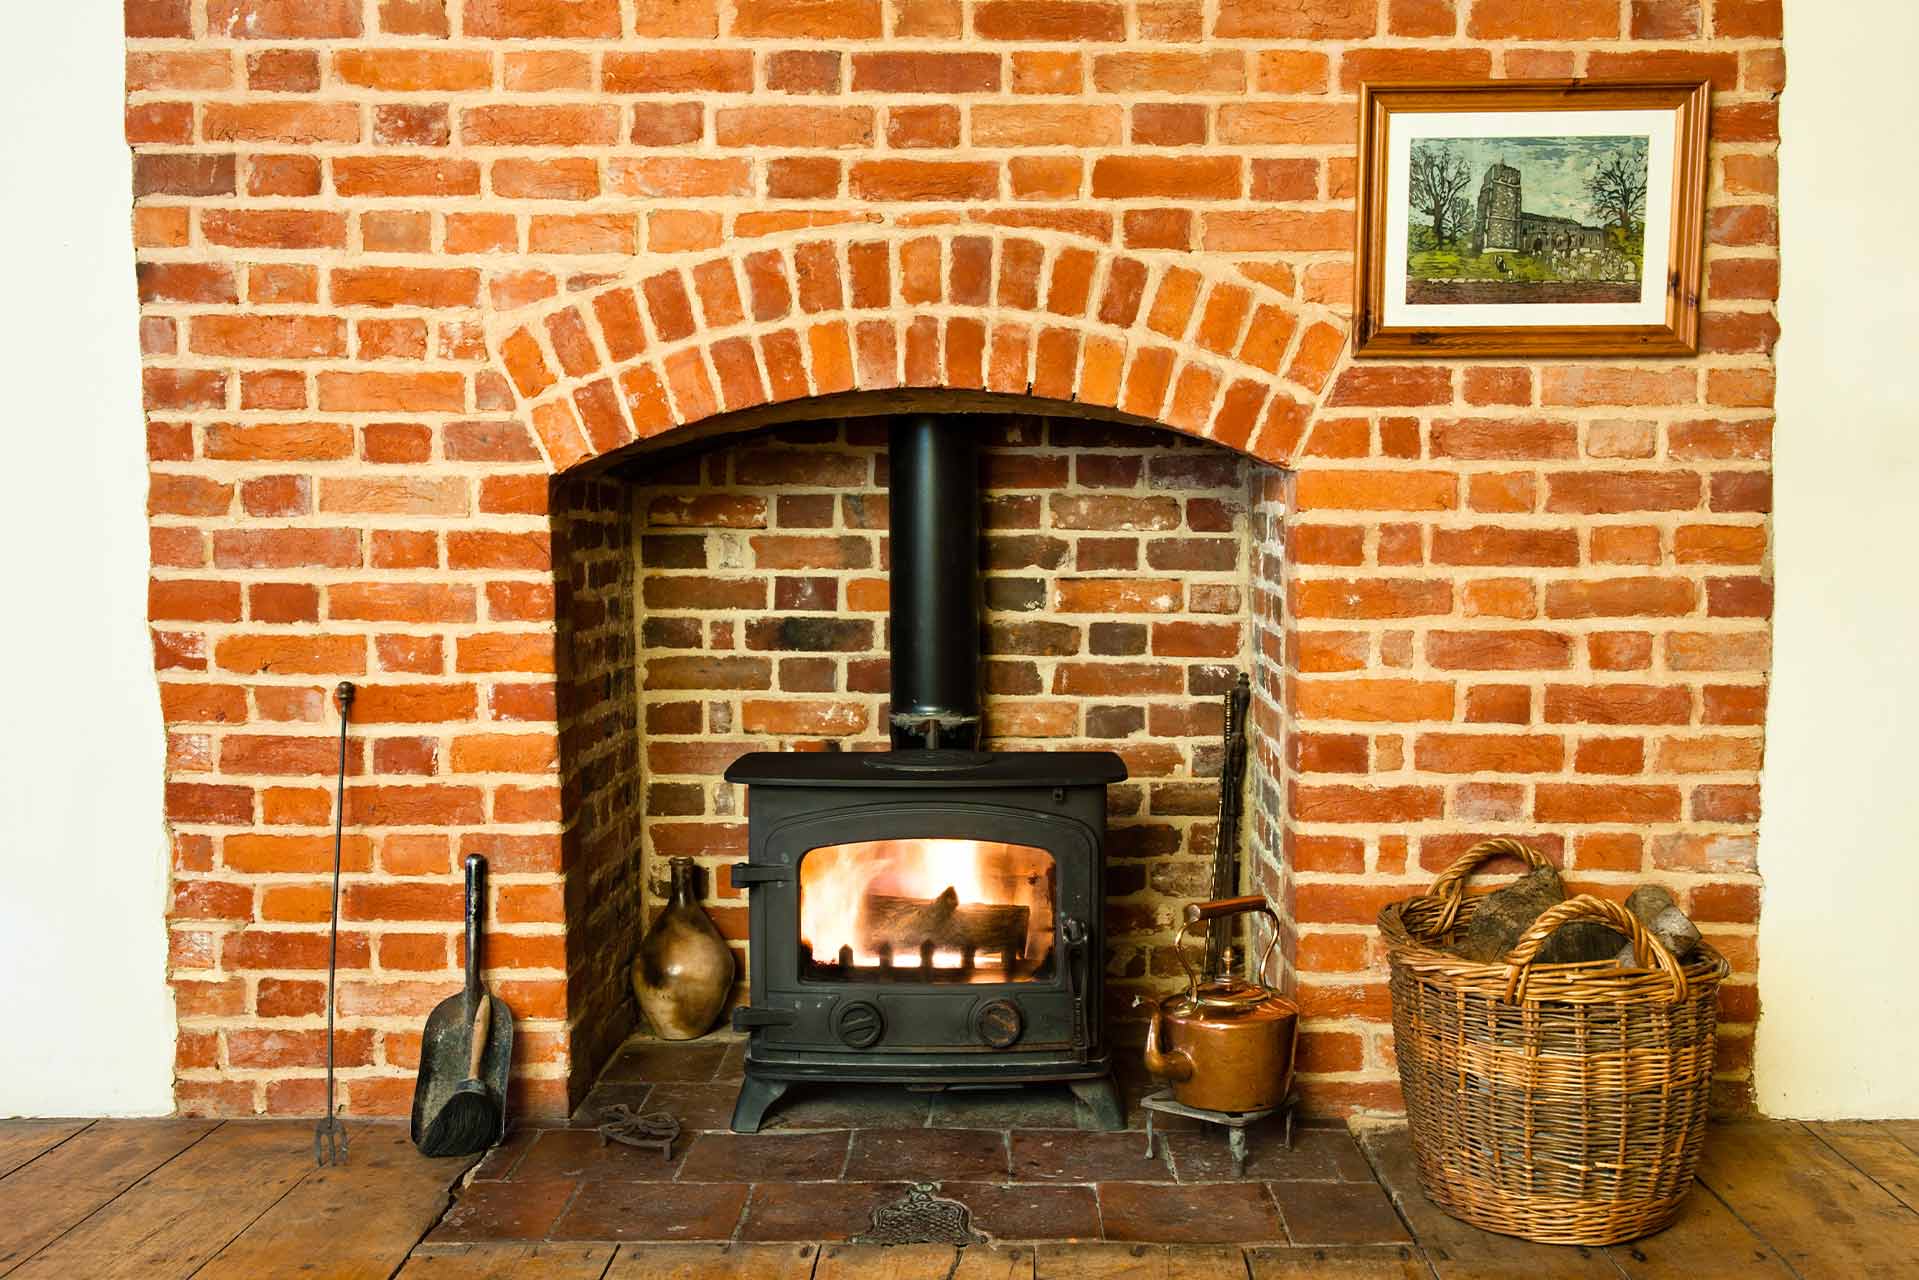 How Do You Know If Your Wood Burner Is Too Old And Needs Replacing